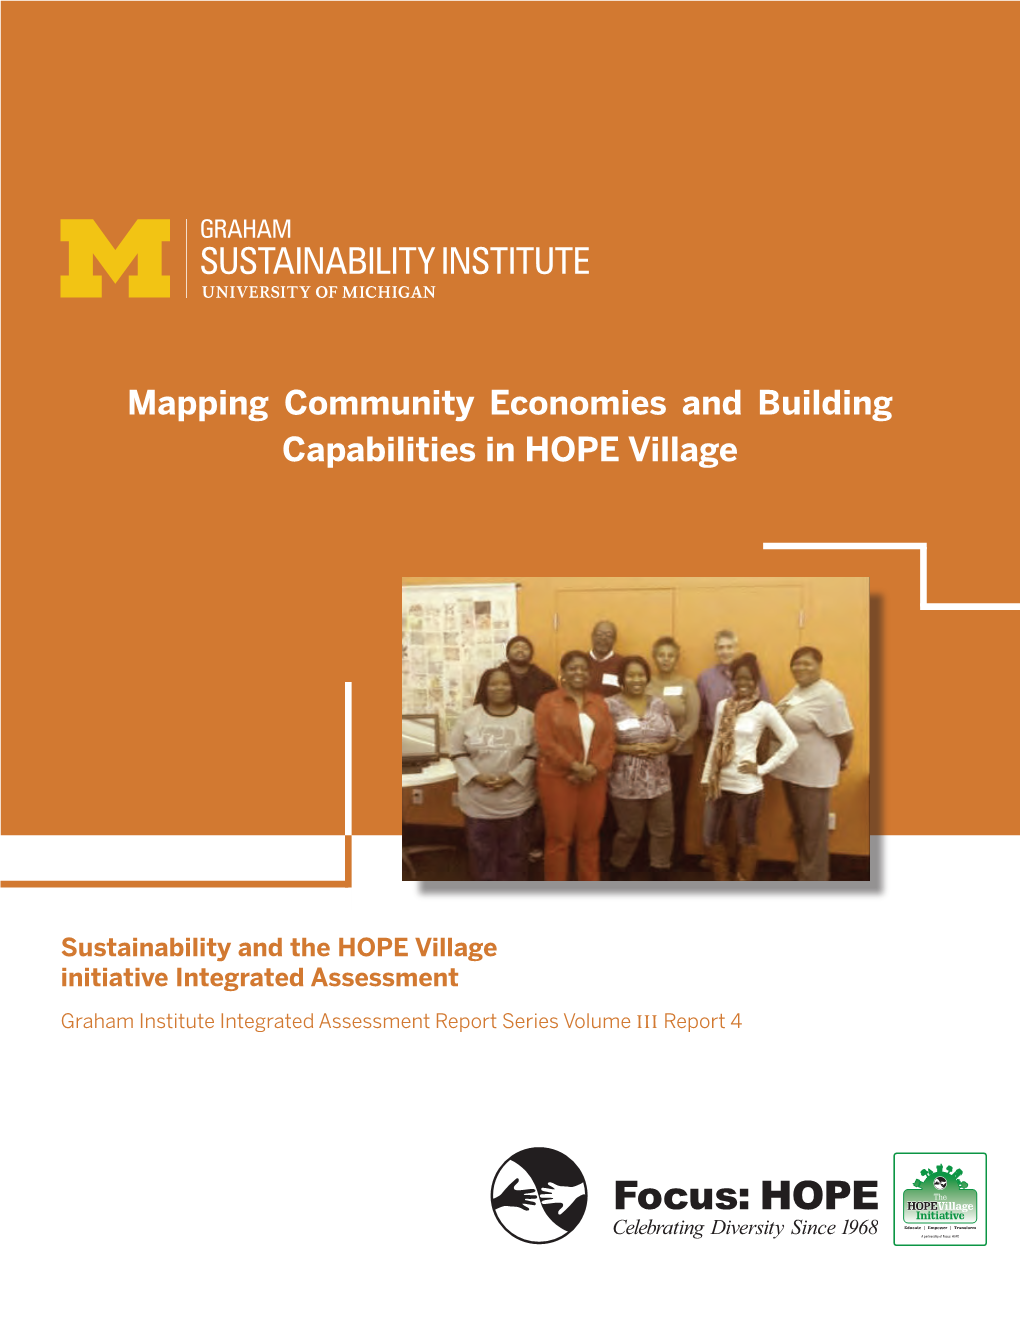 Mapping Community Economies and Building Capabilities in HOPE Village